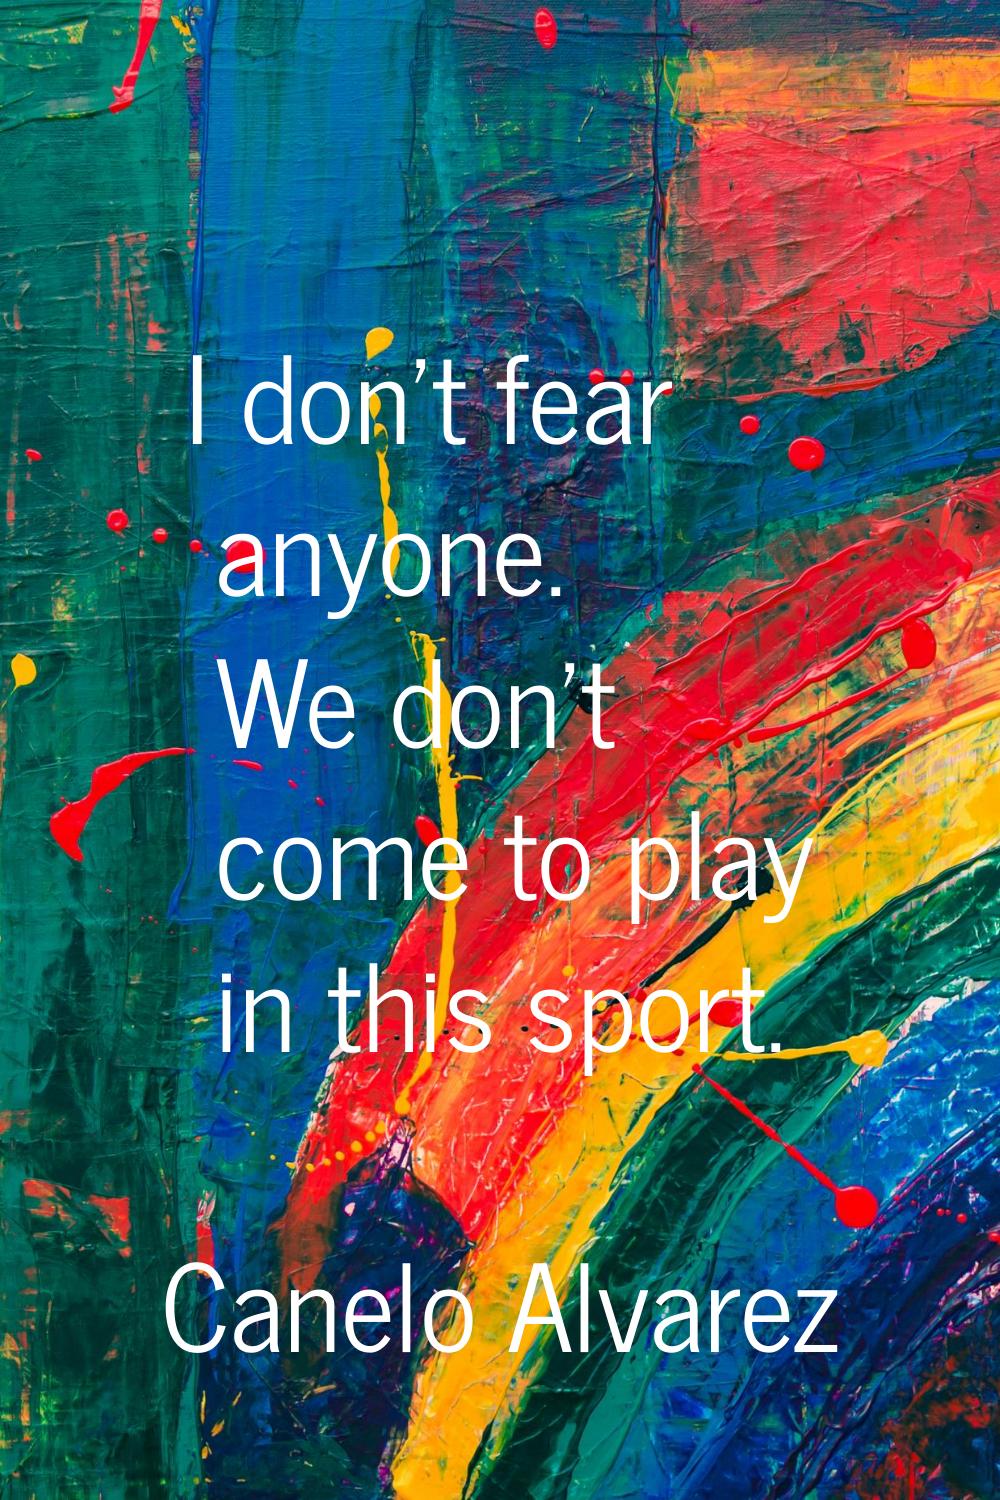 I don't fear anyone. We don't come to play in this sport.